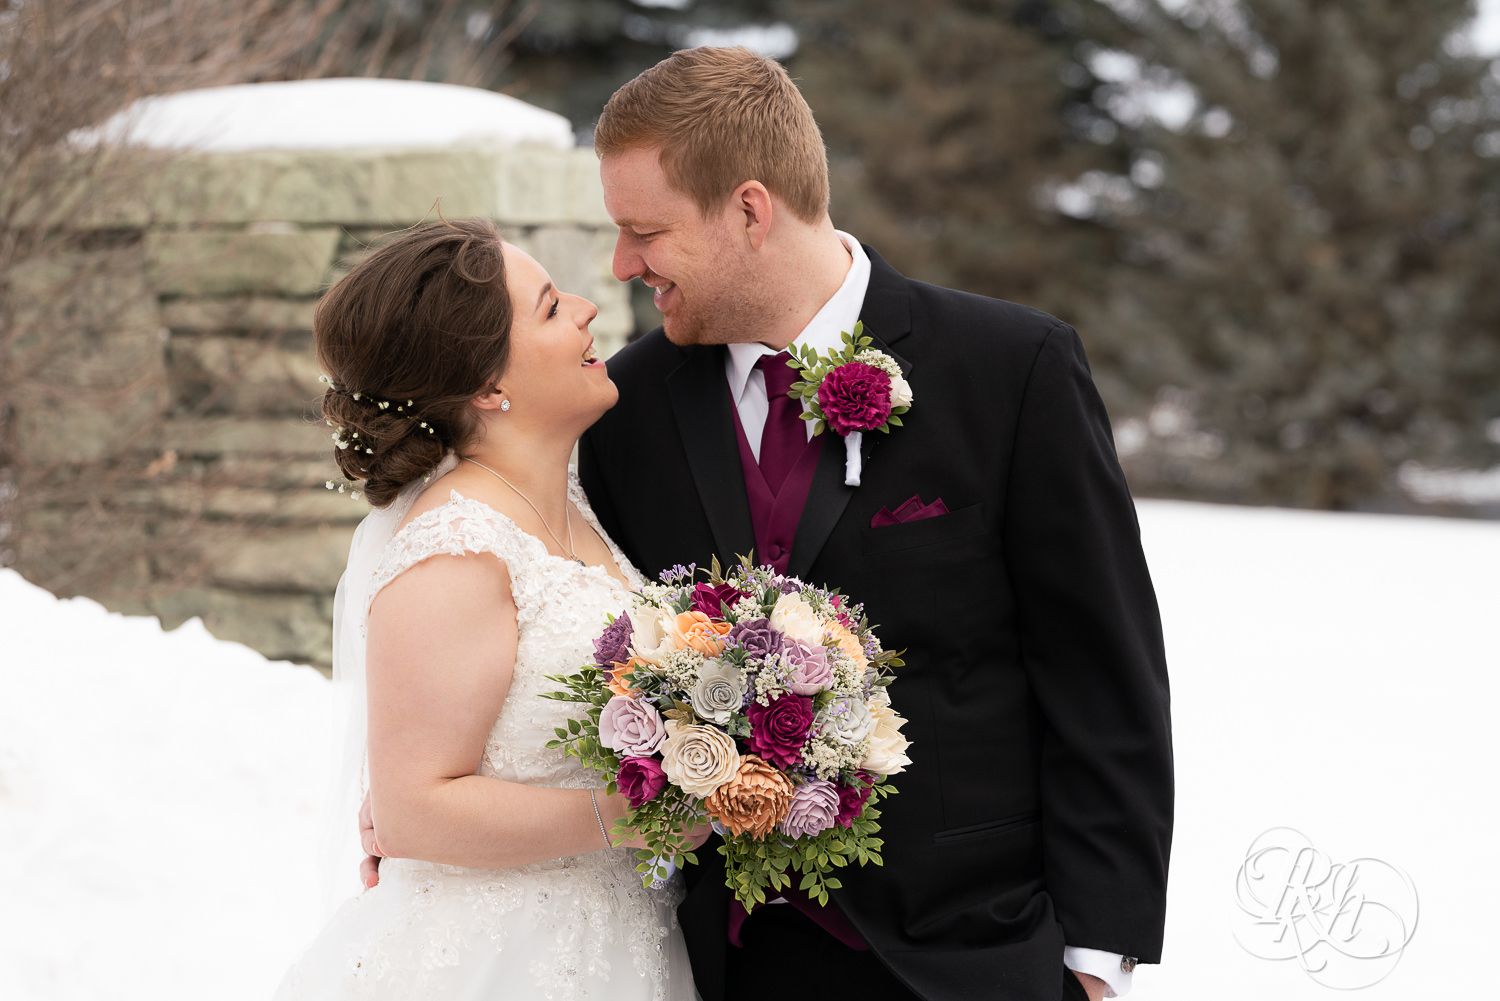 Bride and groom smiling in the snow at Glenhaven Events in Farmington, Minnesota.